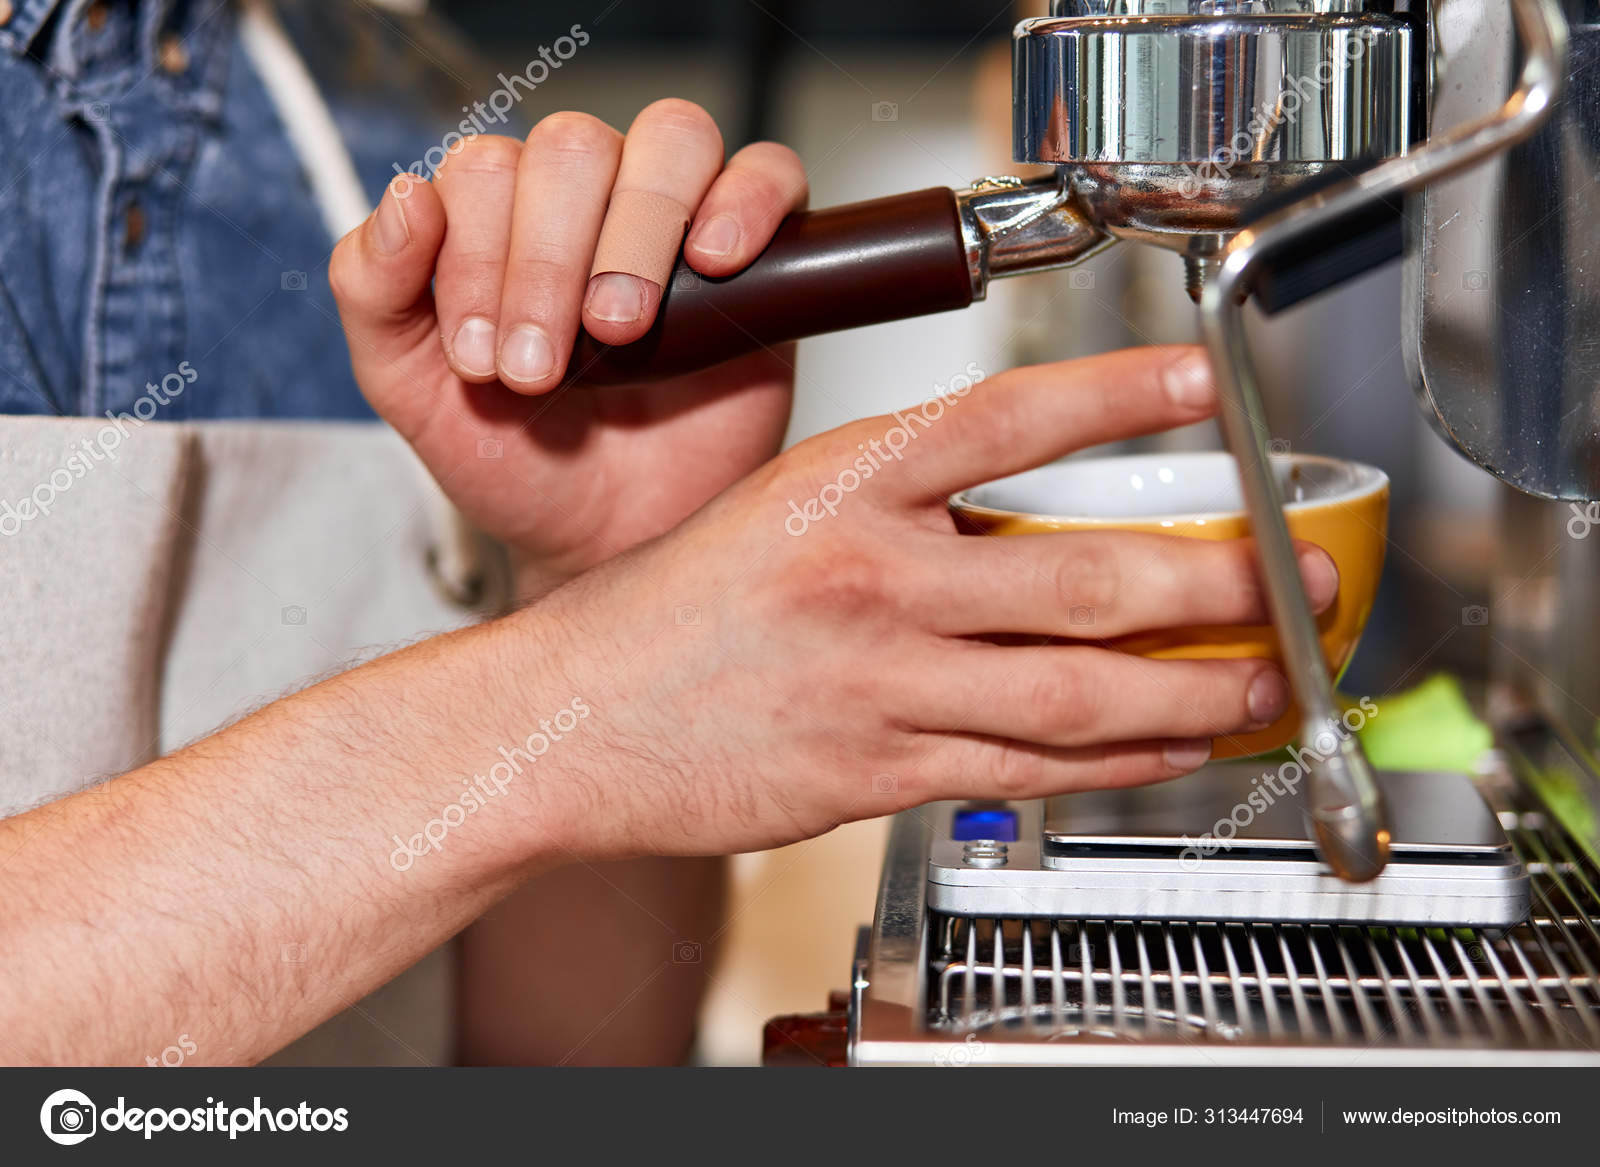 Looking At A Big Coffee Maker In A Coffee House Stock Photo